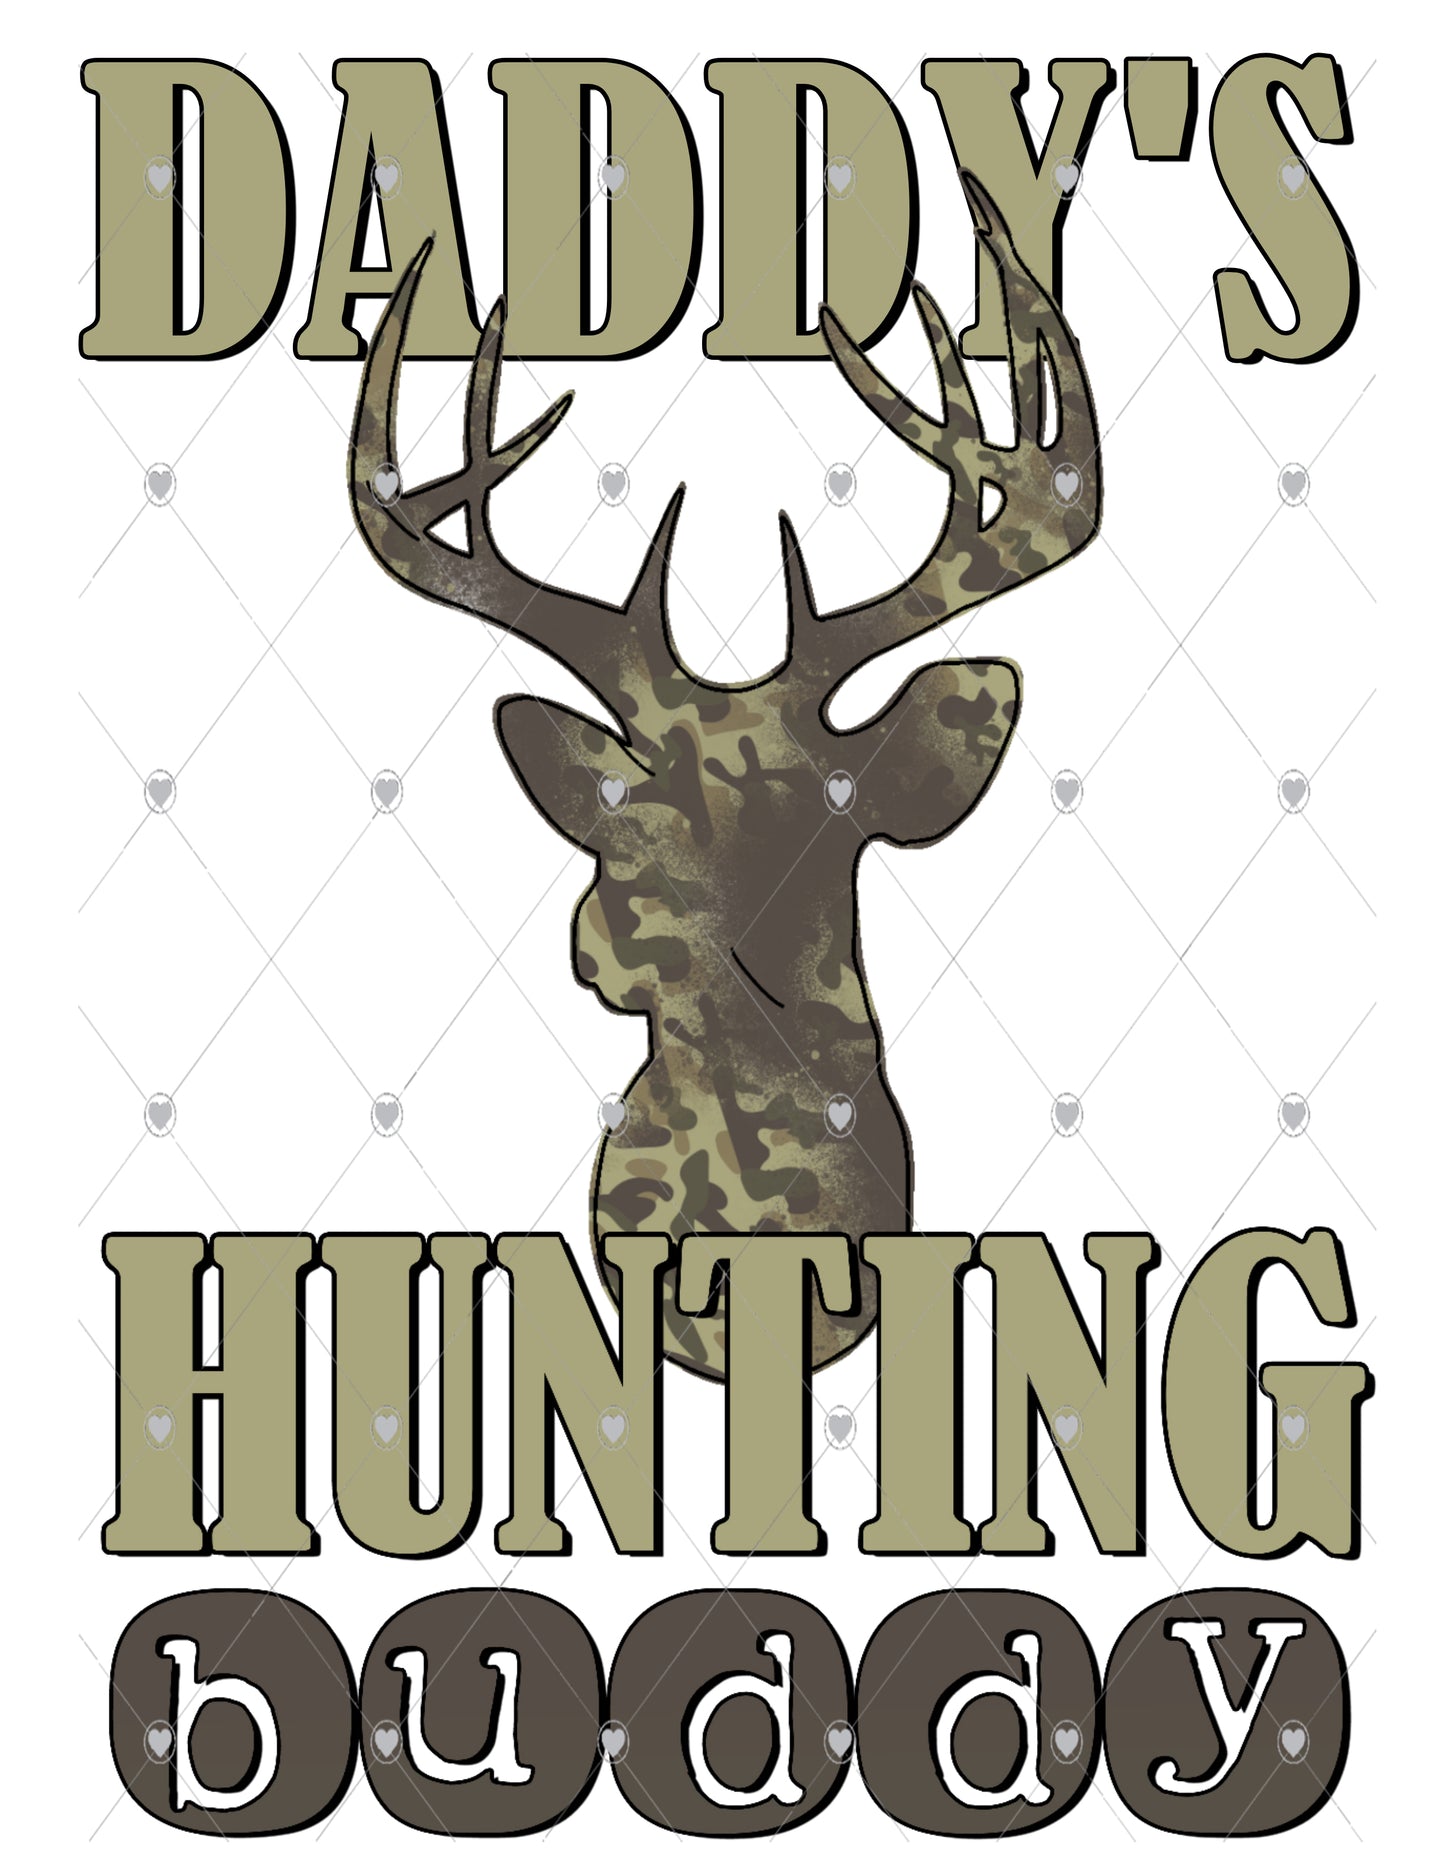 Daddy's Hunting Buddy Deer Camo Ready To Press Sublimation Transfer